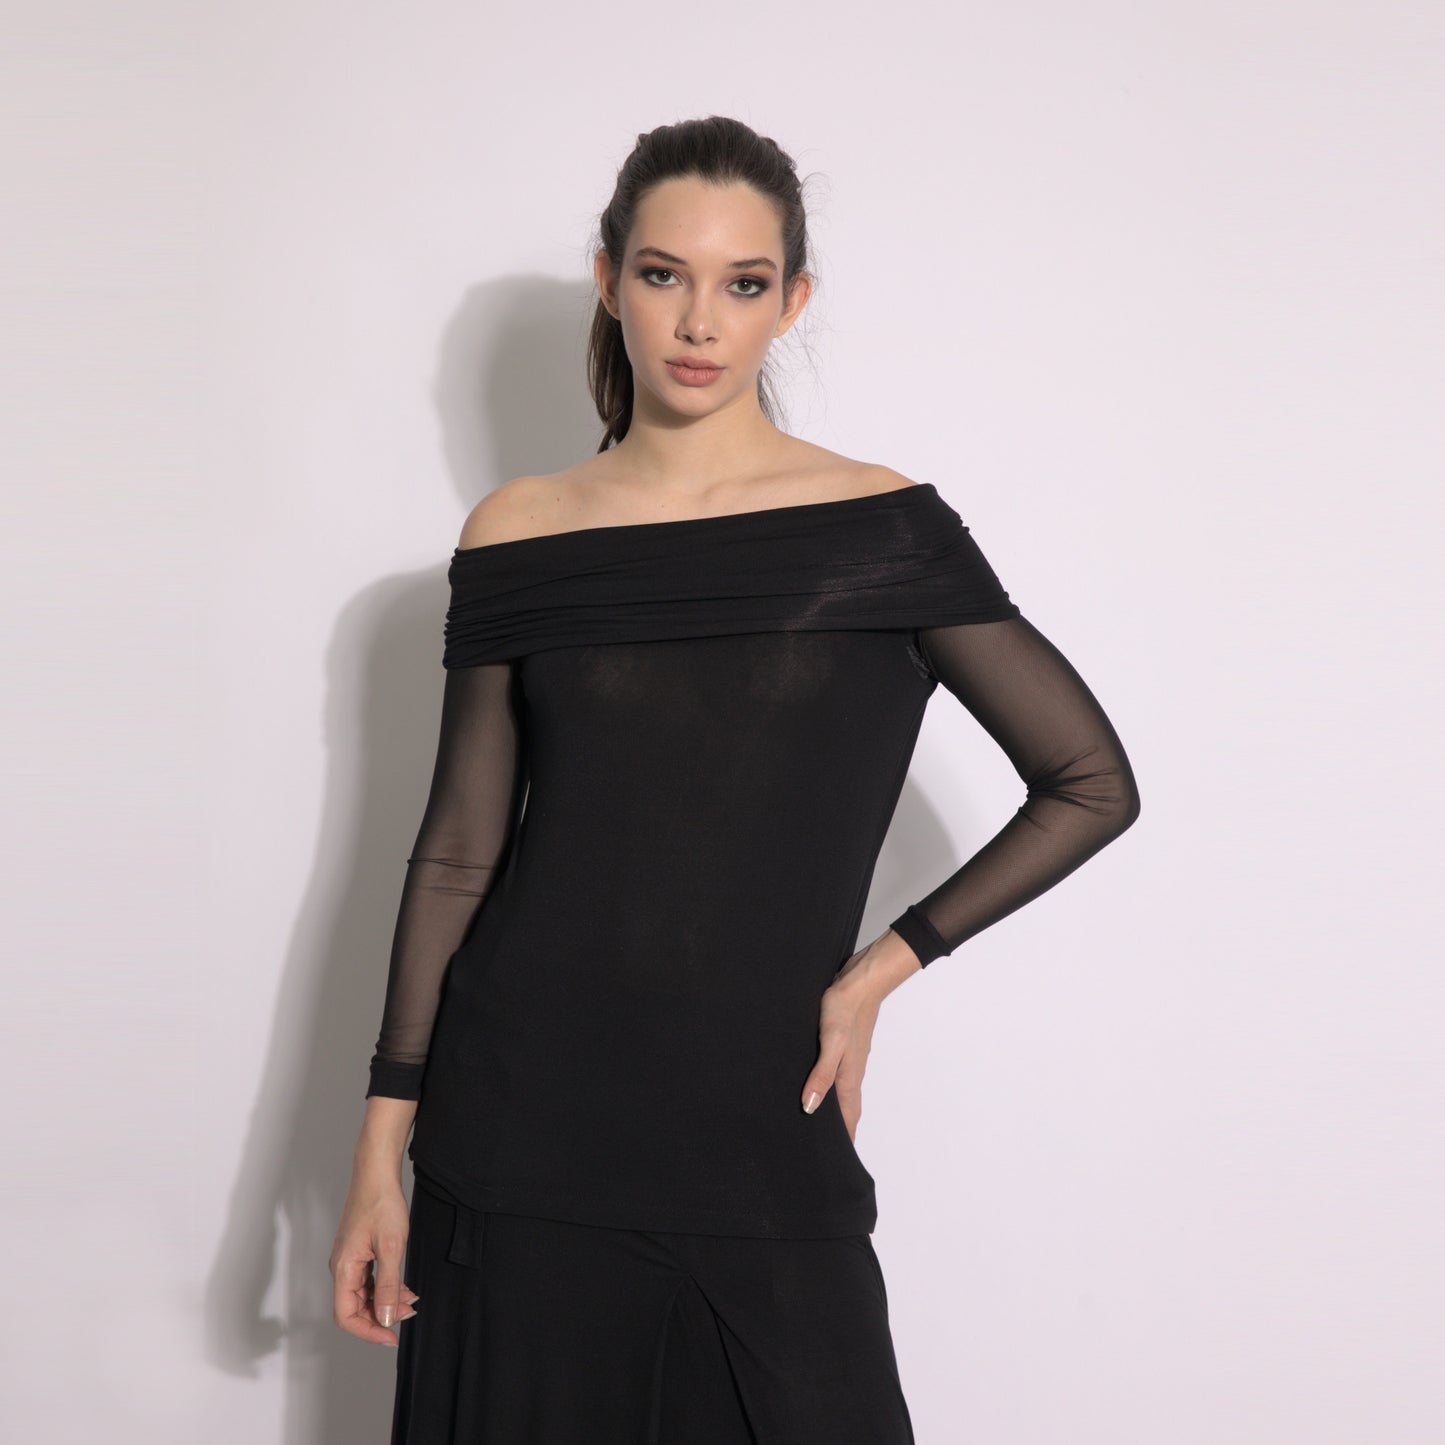 Isabella - Blouse with off-the-shoulder neckline and black tulle sleeves